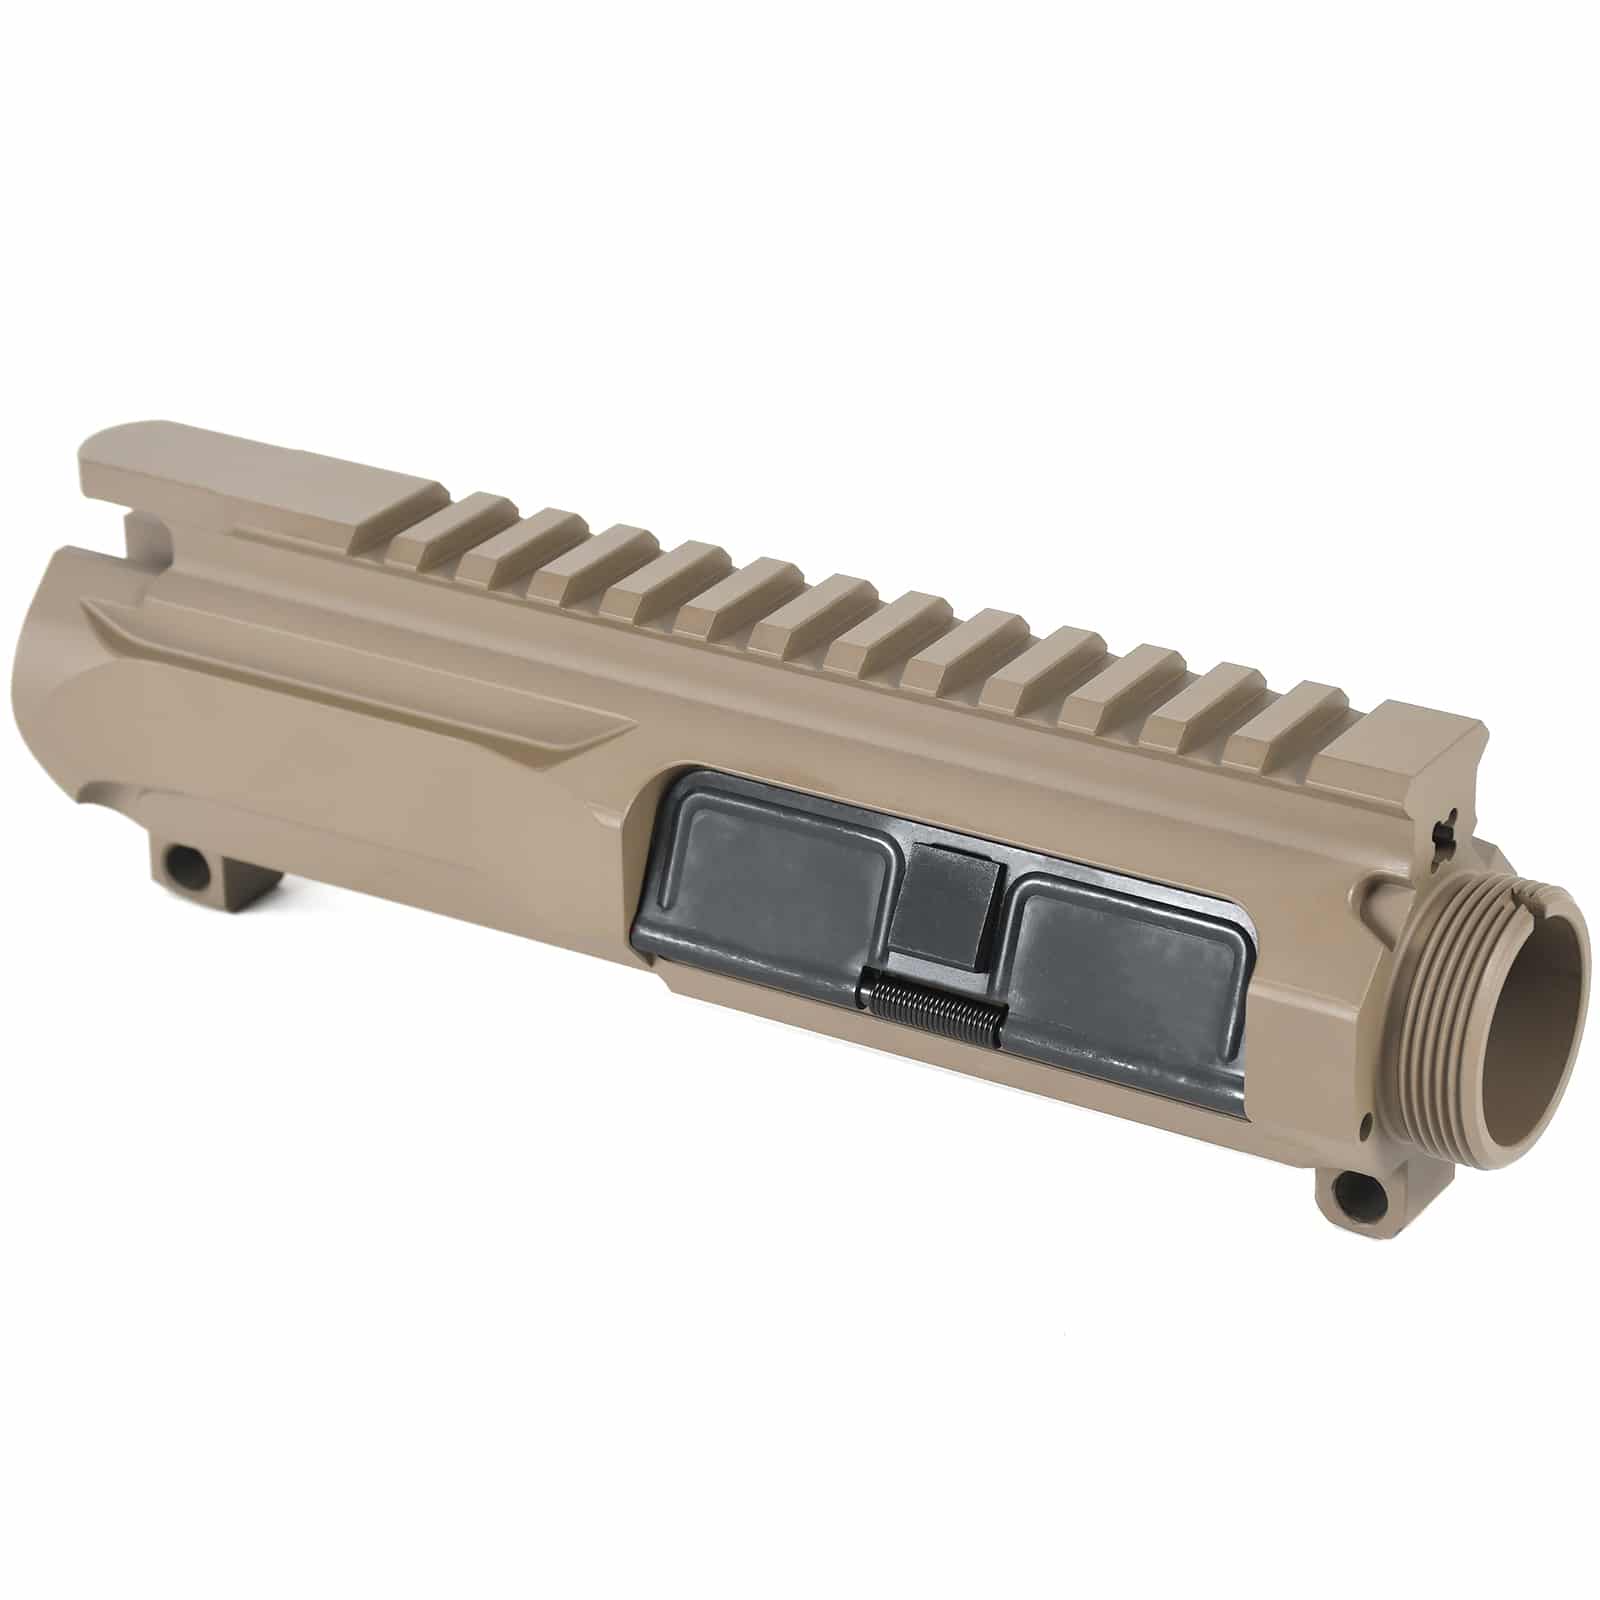 Flat Dark Earth AR-15 Uppers and Parts